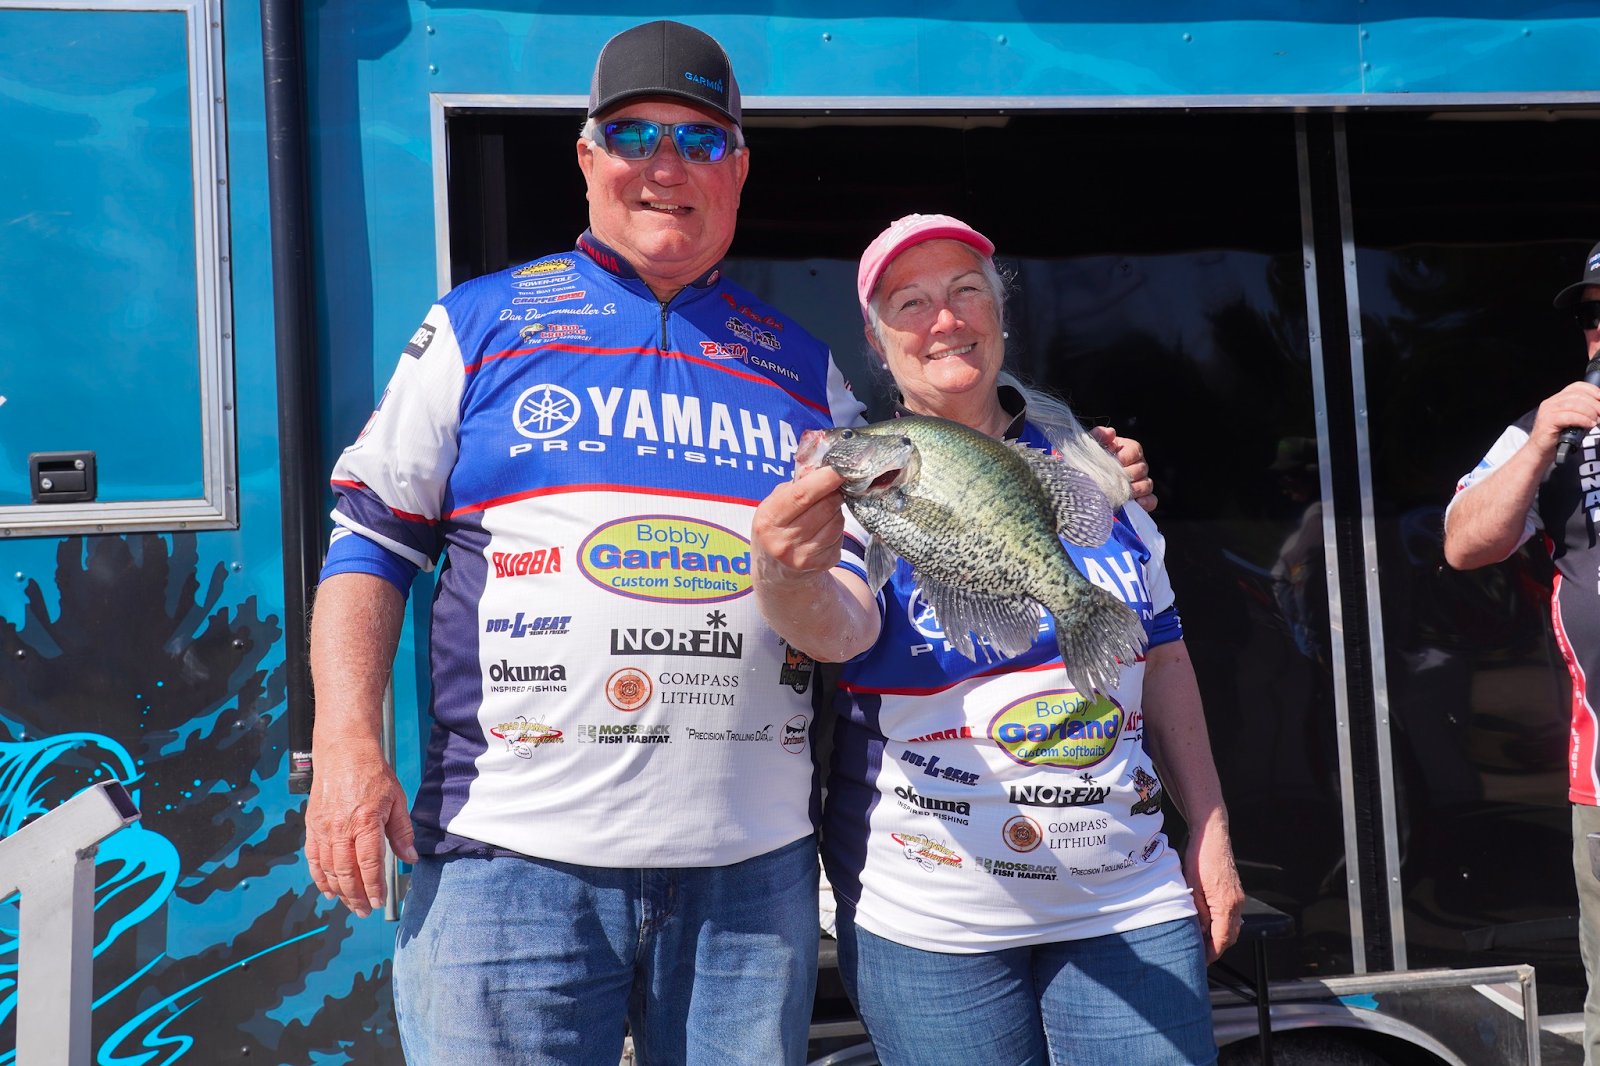 Dan Dannenmueller on X: With as much fishing as we do, we need to keep our  senses sharp! Sue and I rely on Hook and Bullet sunglasses to help ensure  that we